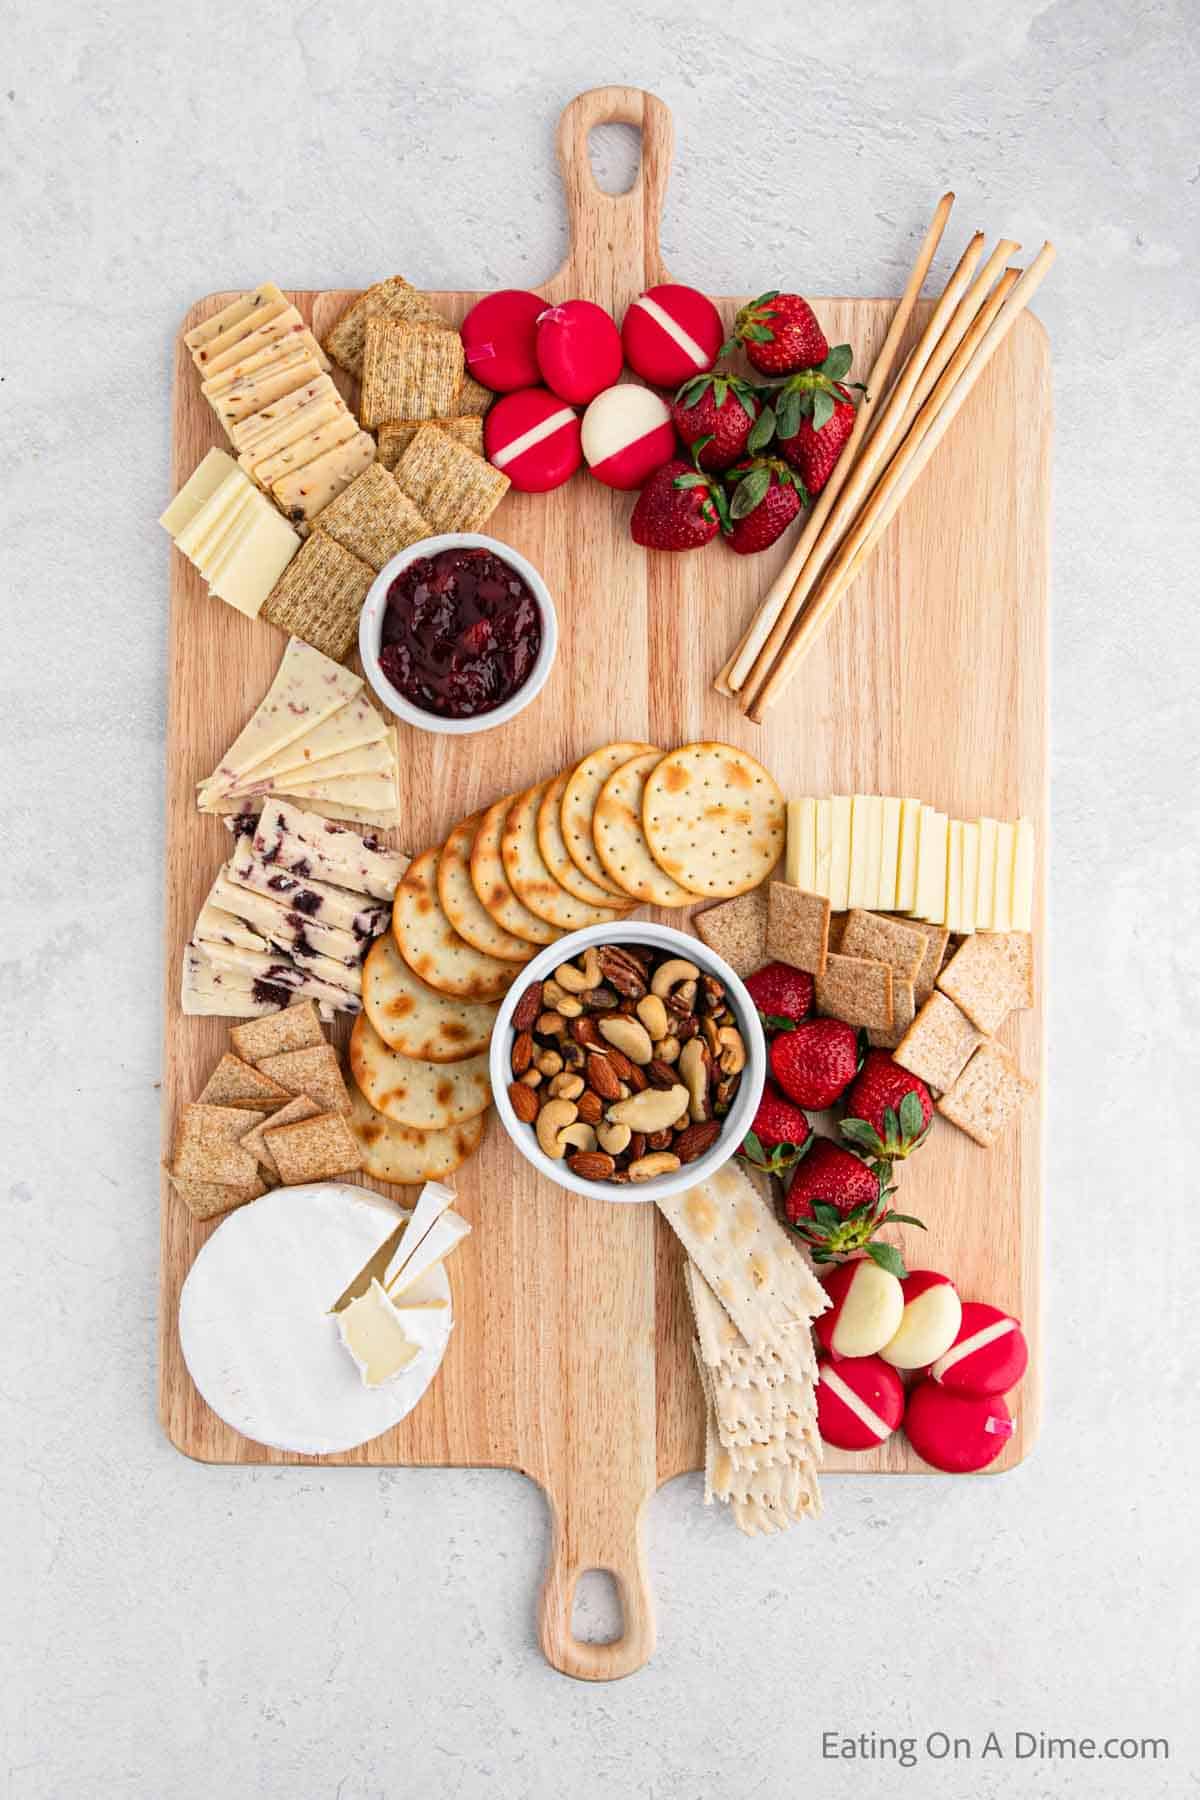 Placing cheese, crackers, fruit, meats on the board